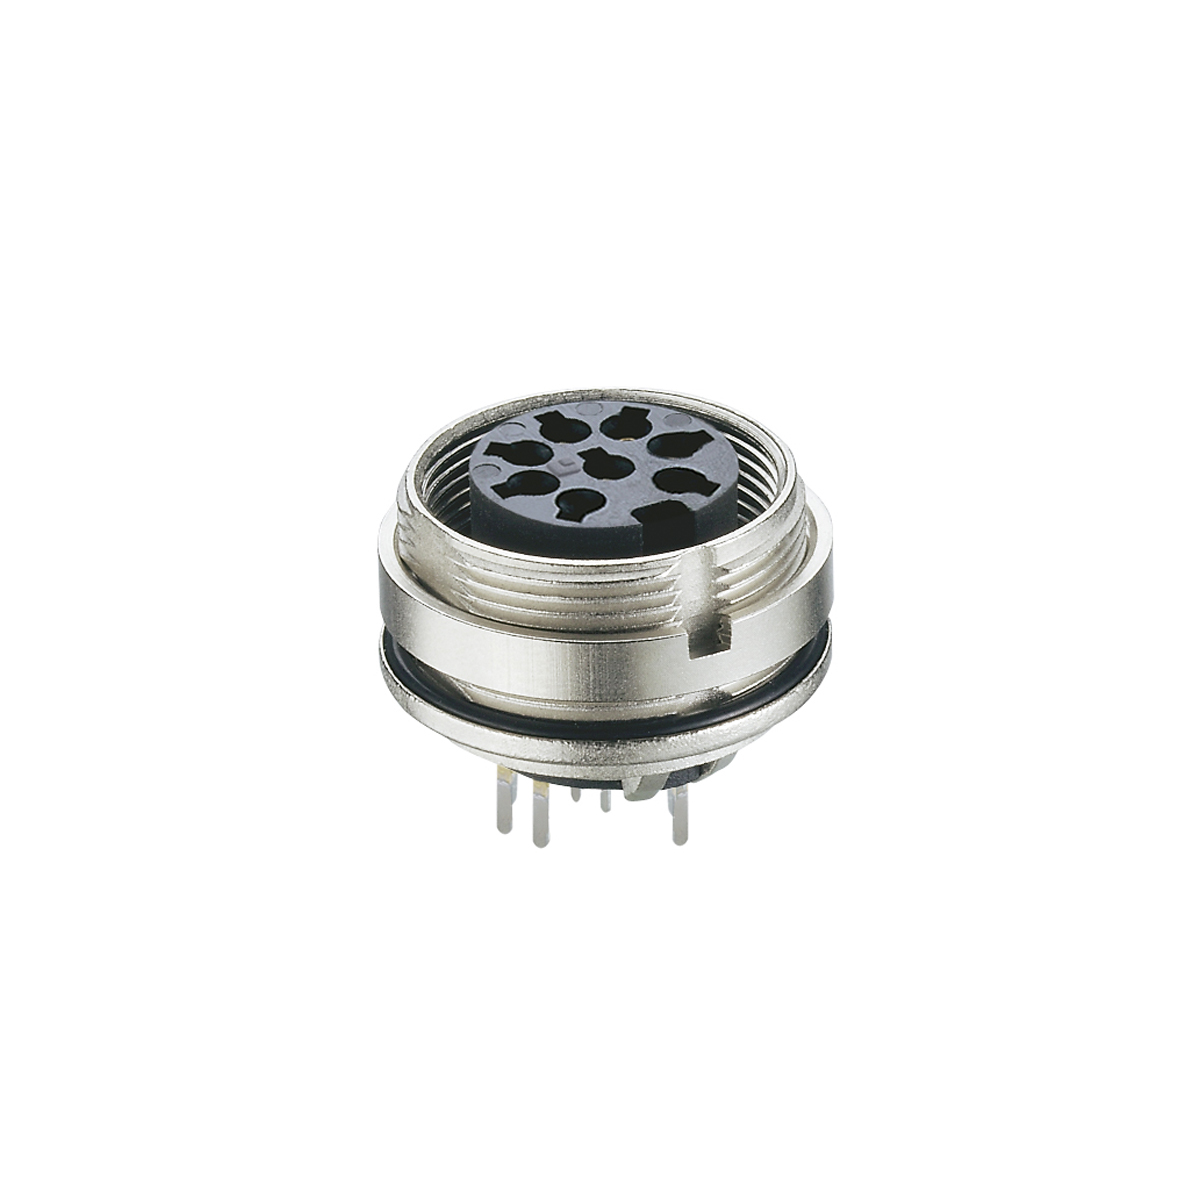 Lumberg: 0307-1 (Series 03 | Circular connectors with threaded joint M16 acc. to IEC 61076-2-106, IP40/IP68)